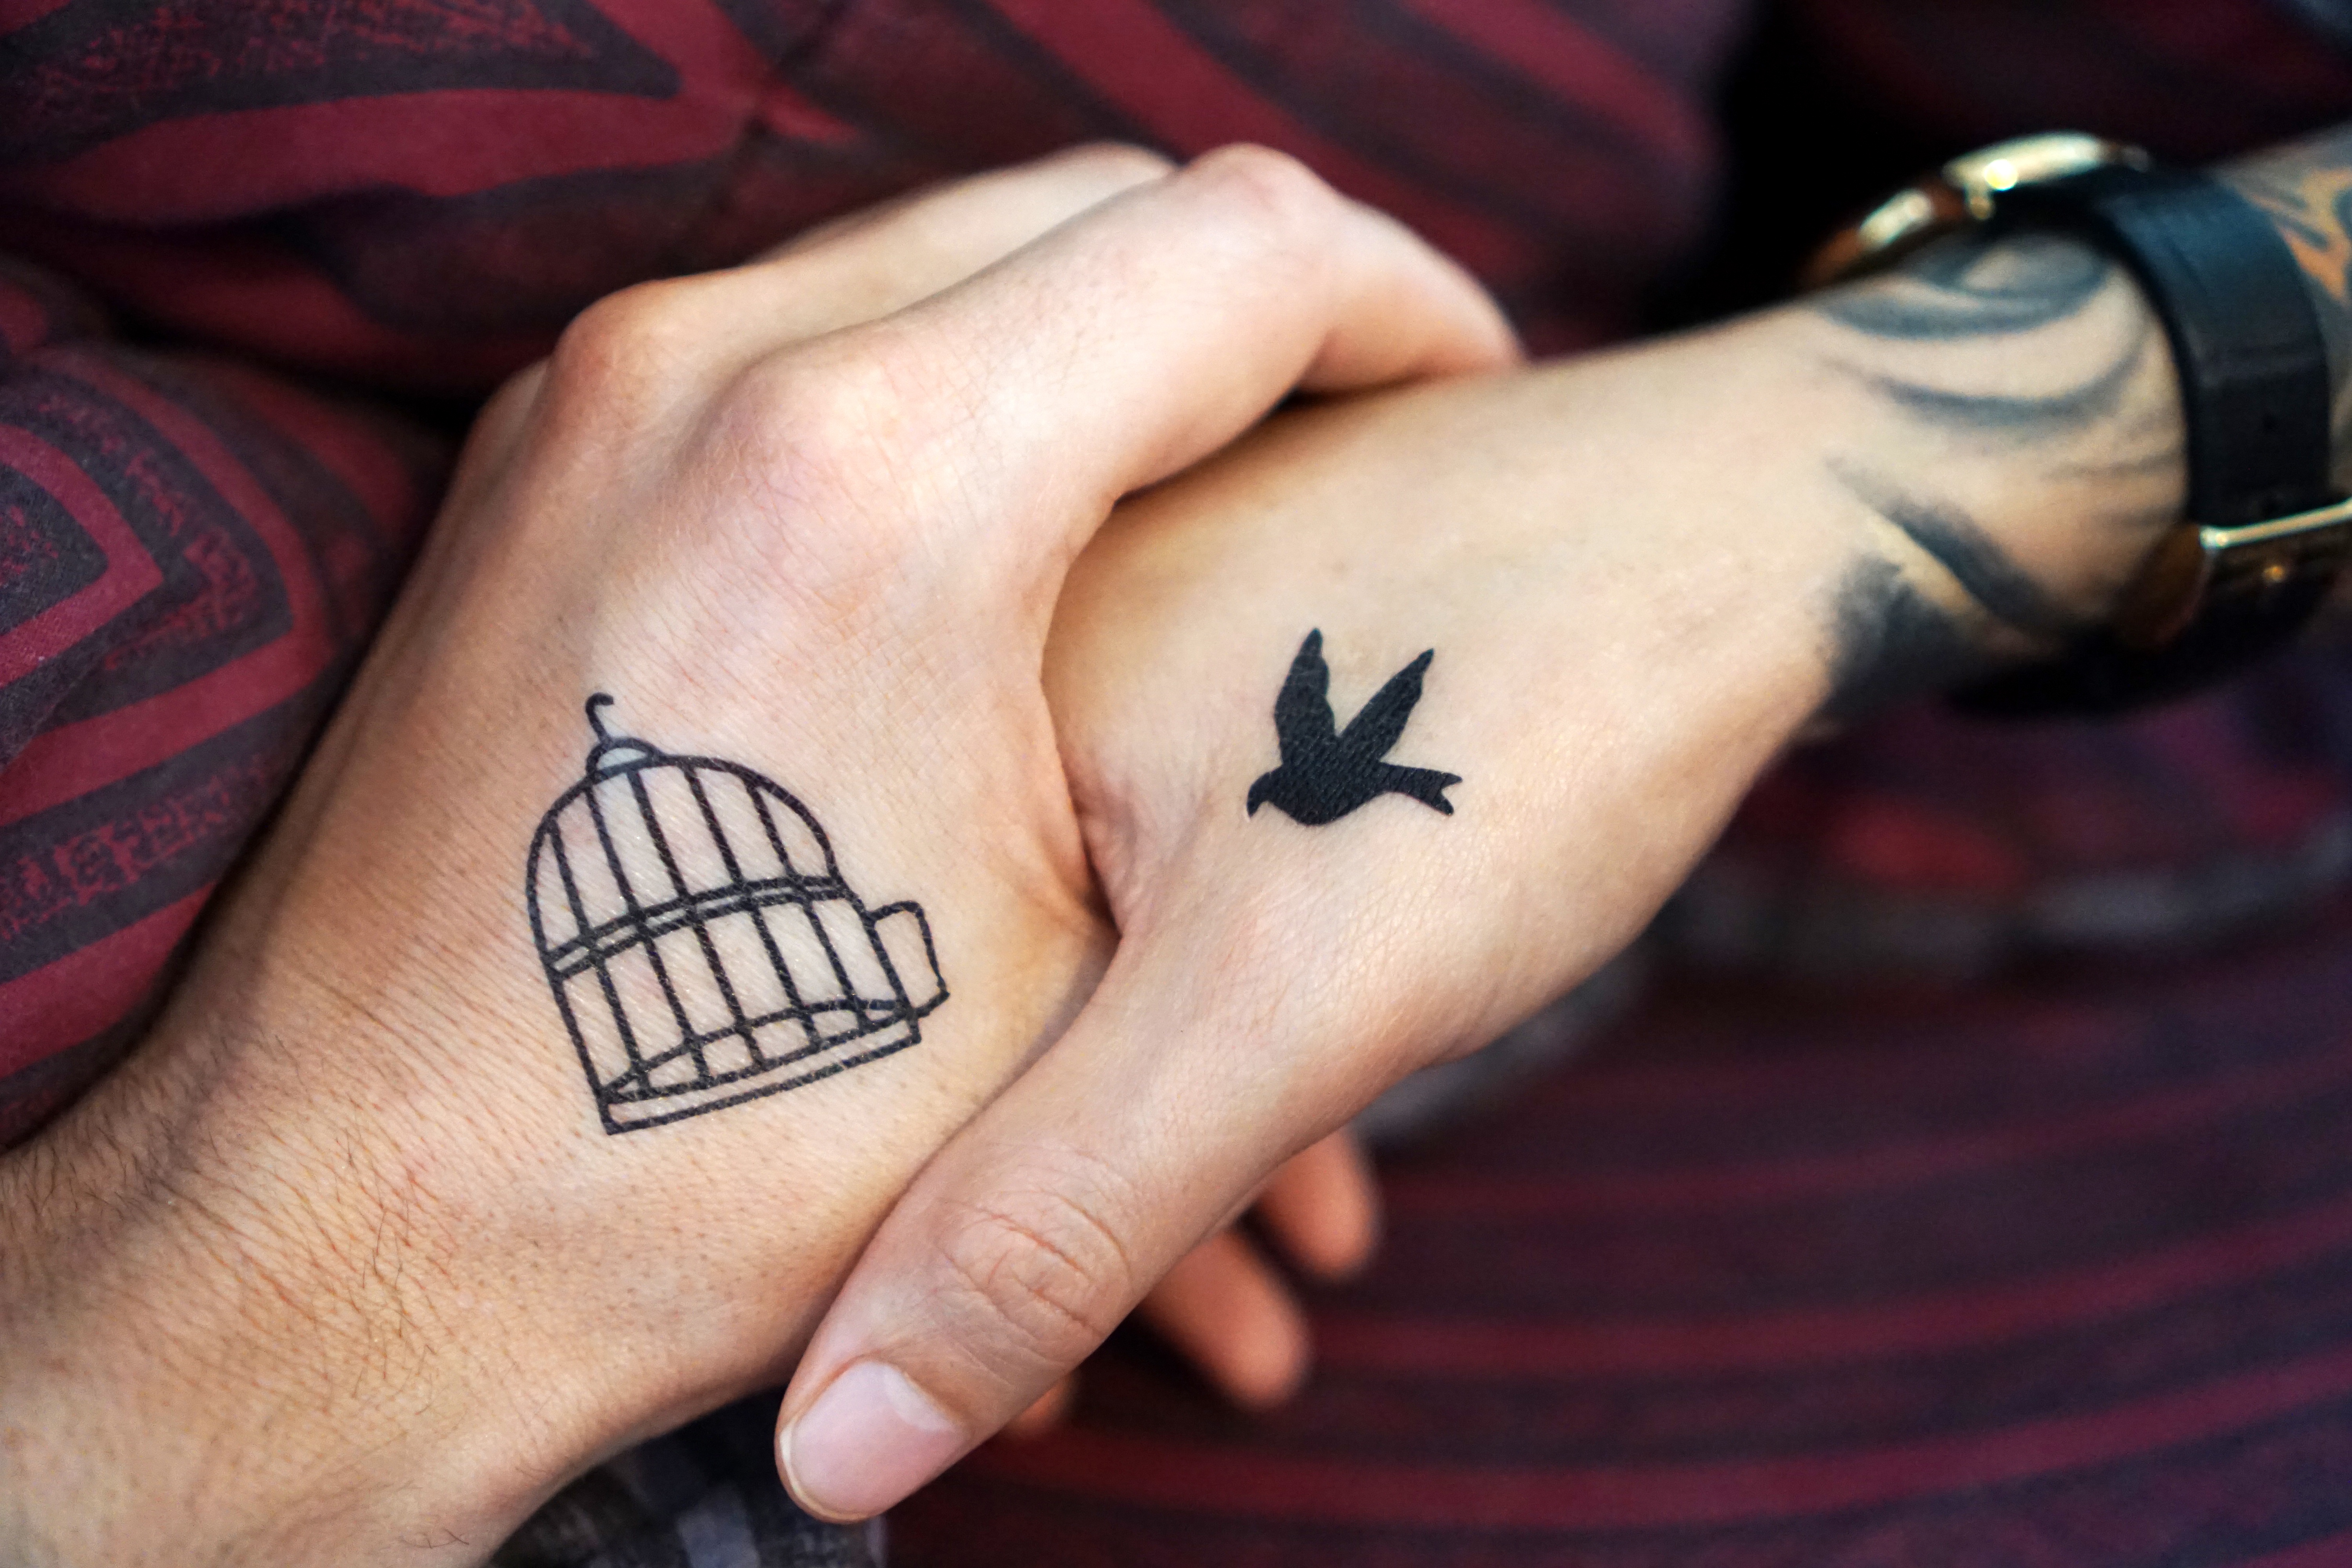 Mobile wallpaper: Tattoo, Tattoos, Hands, Pair, Couple, Love, 128442  download the picture for free.